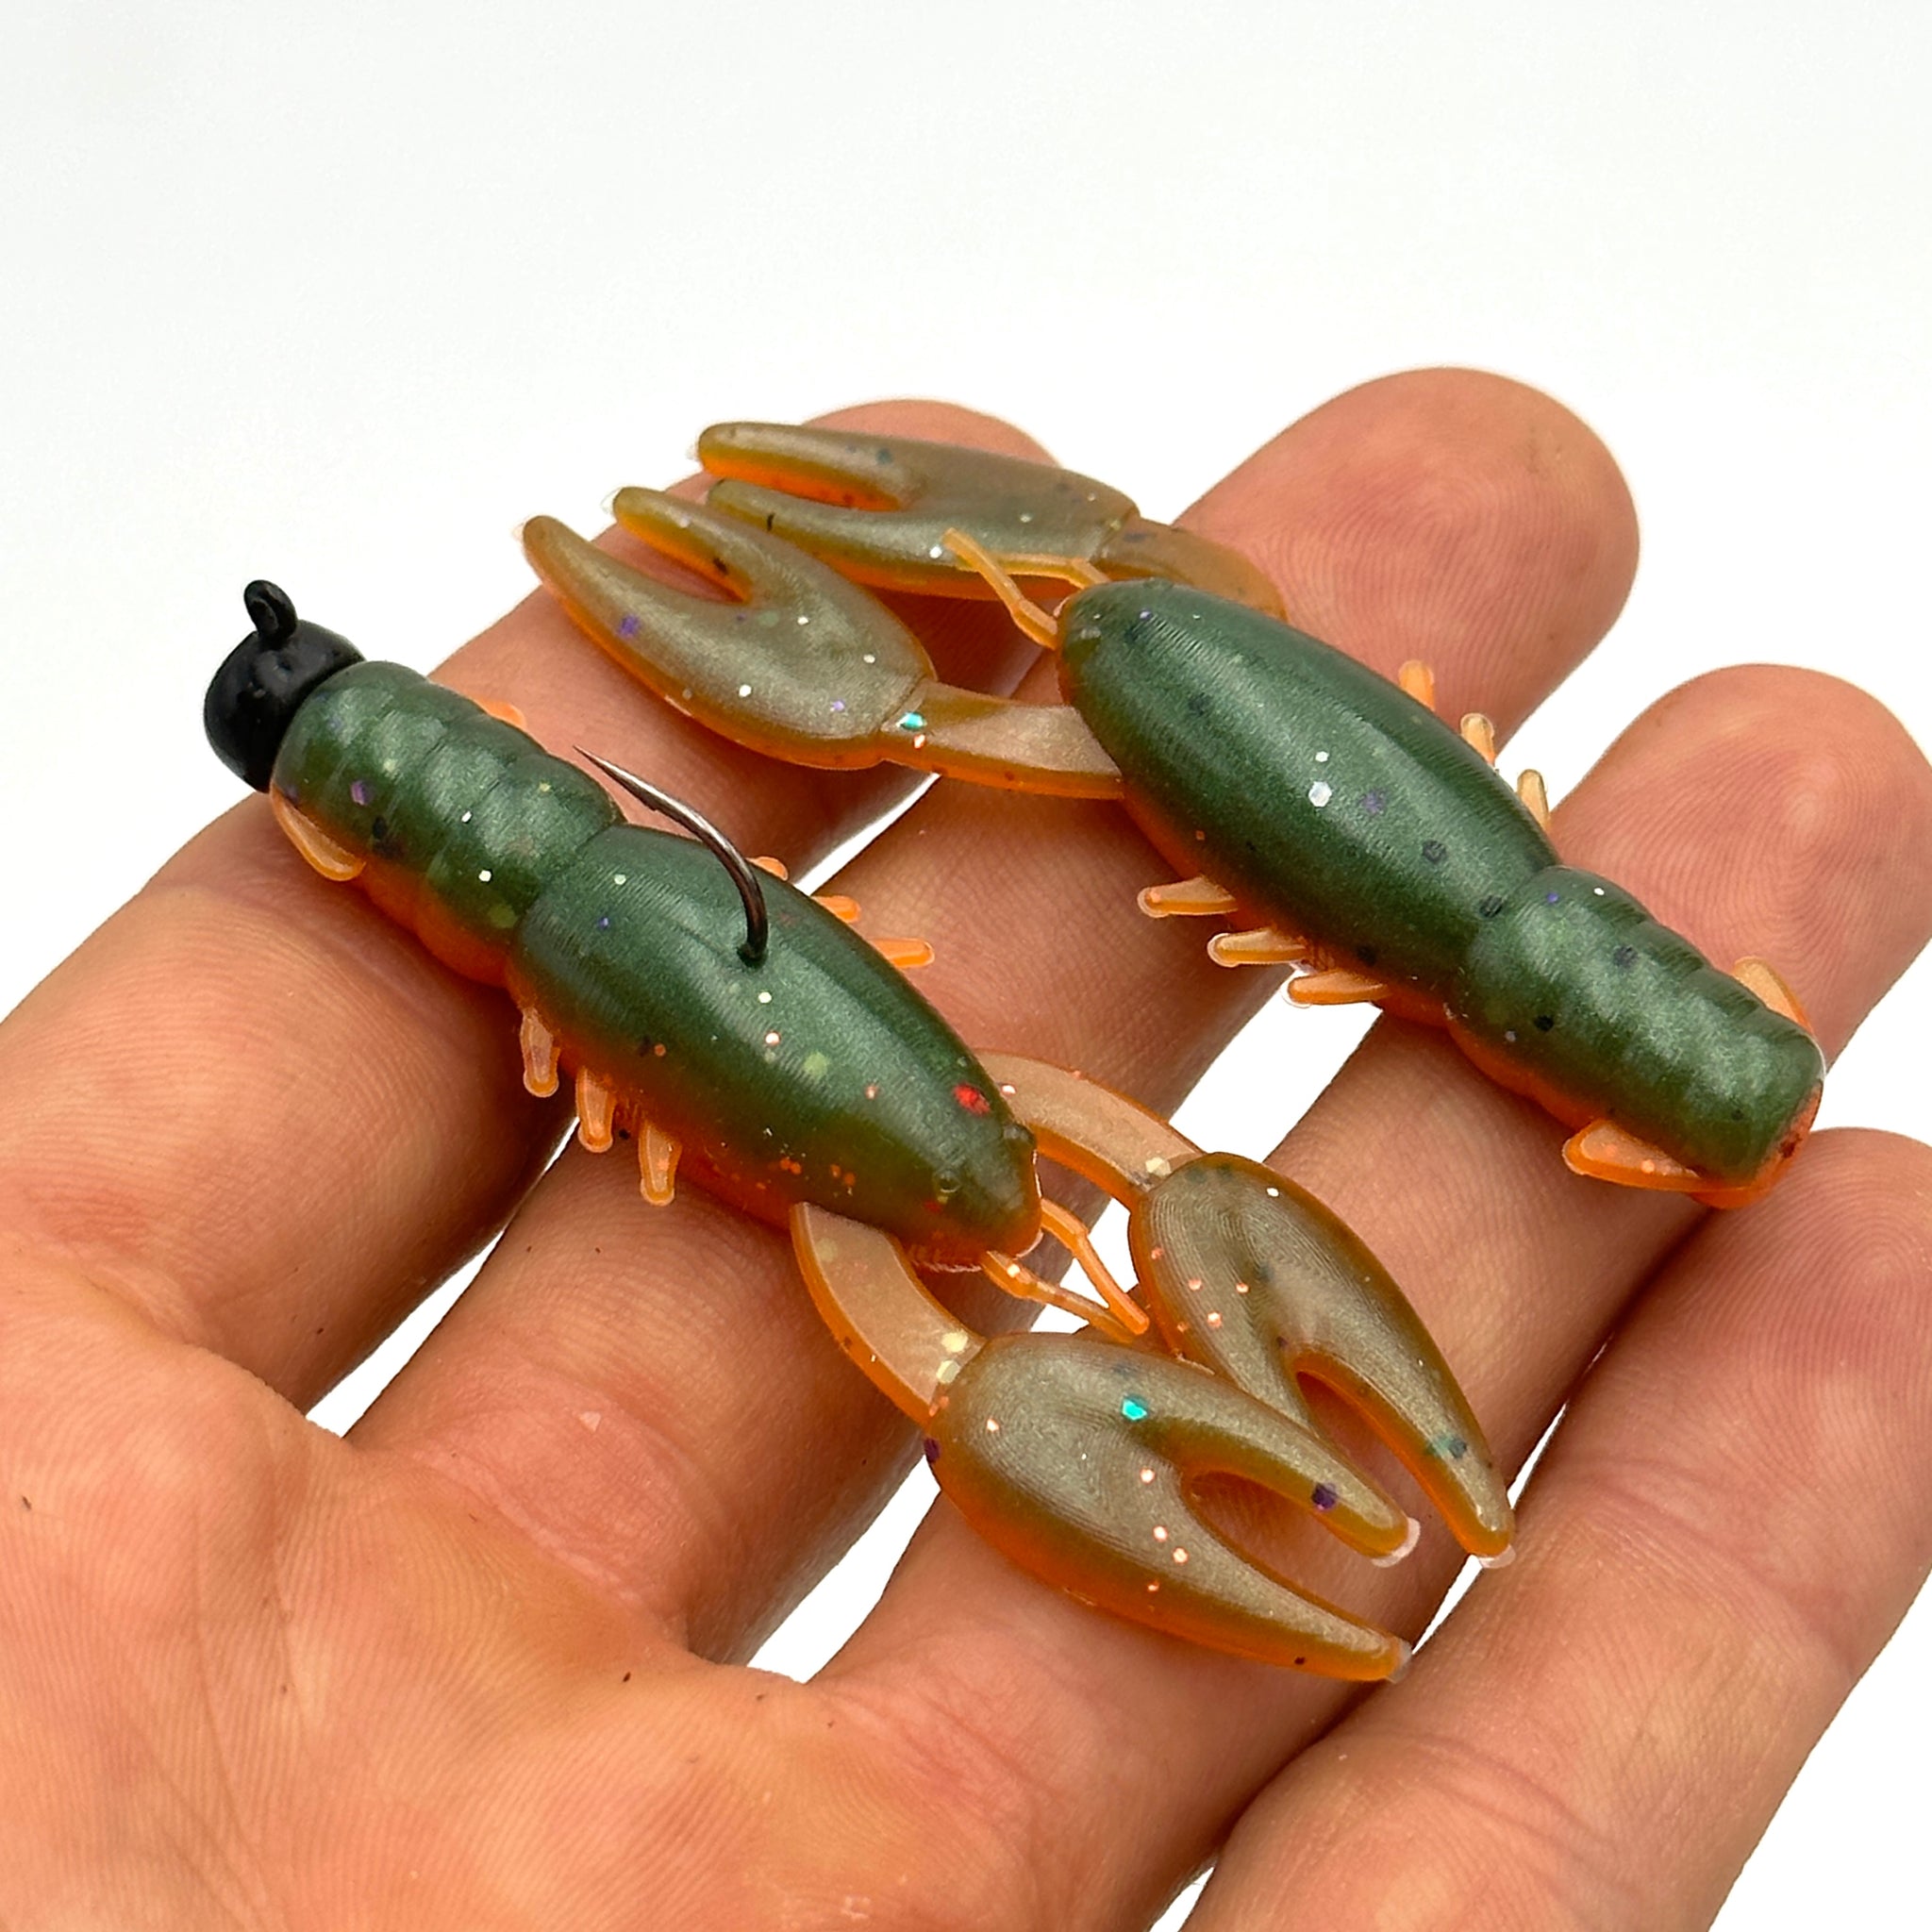 2.5 Inch Ned Craw Hand Injection Mold – Epic Bait Molds